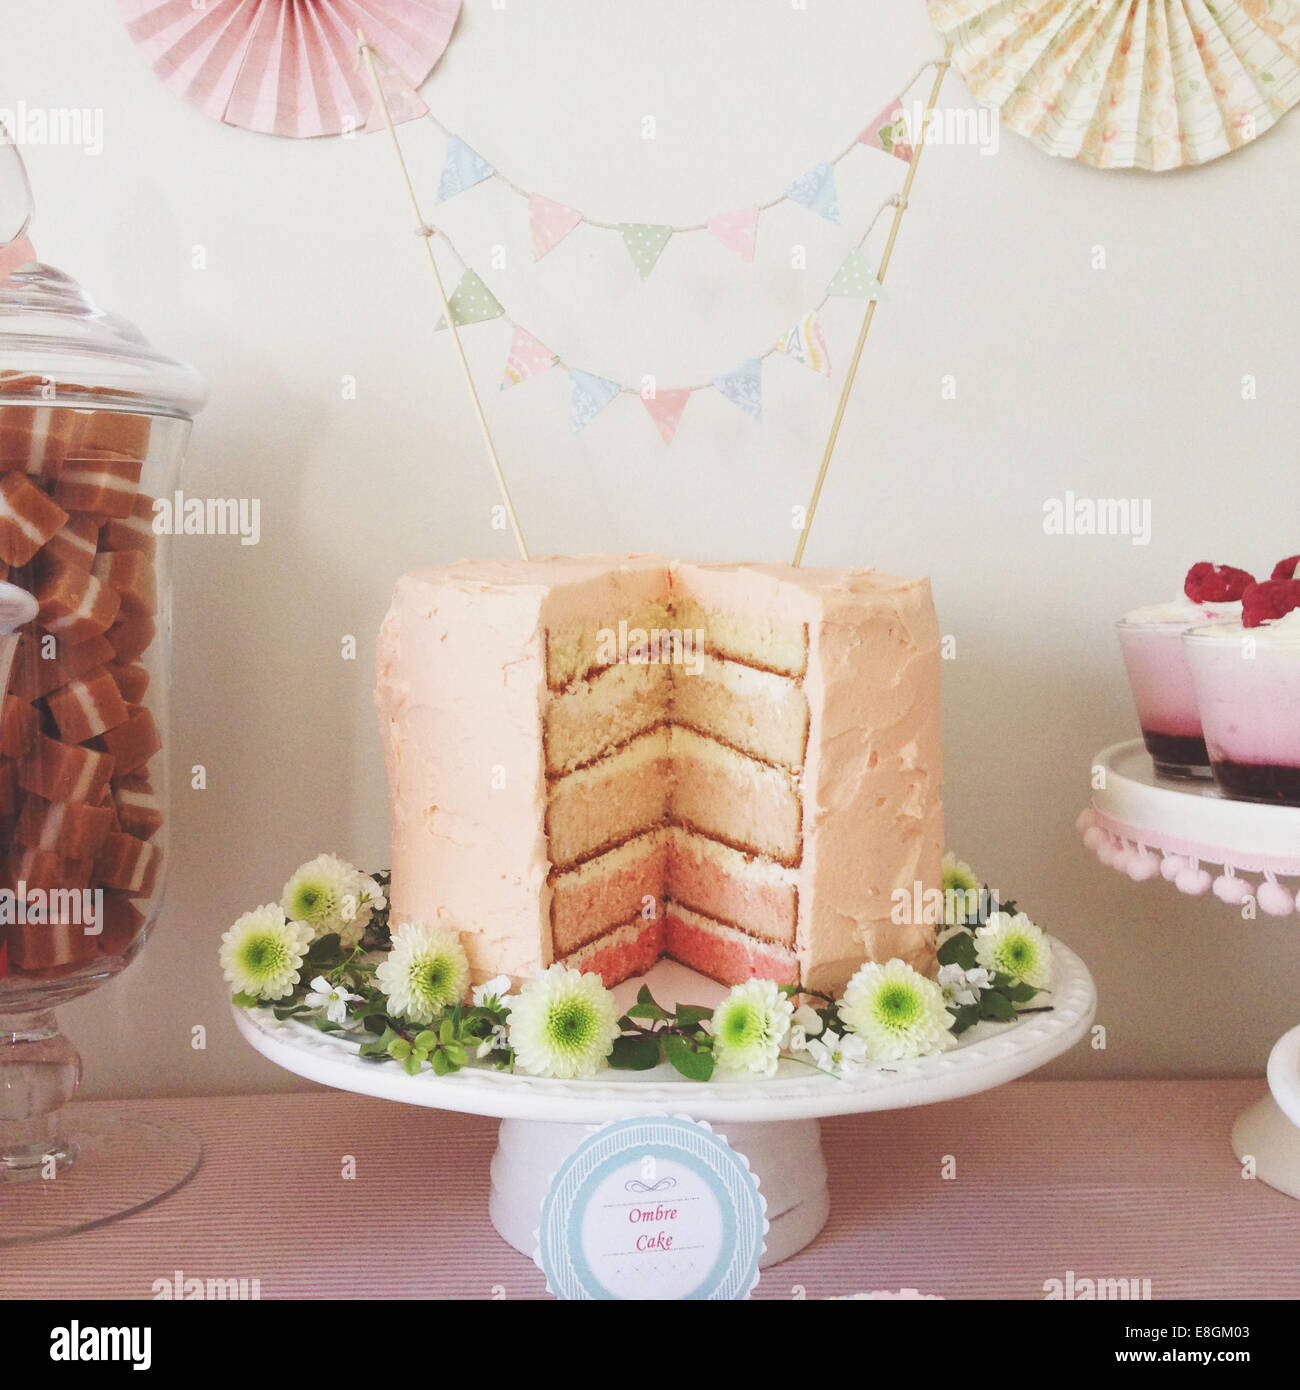 Pink Ombre cake with large slice removed Stock Photo